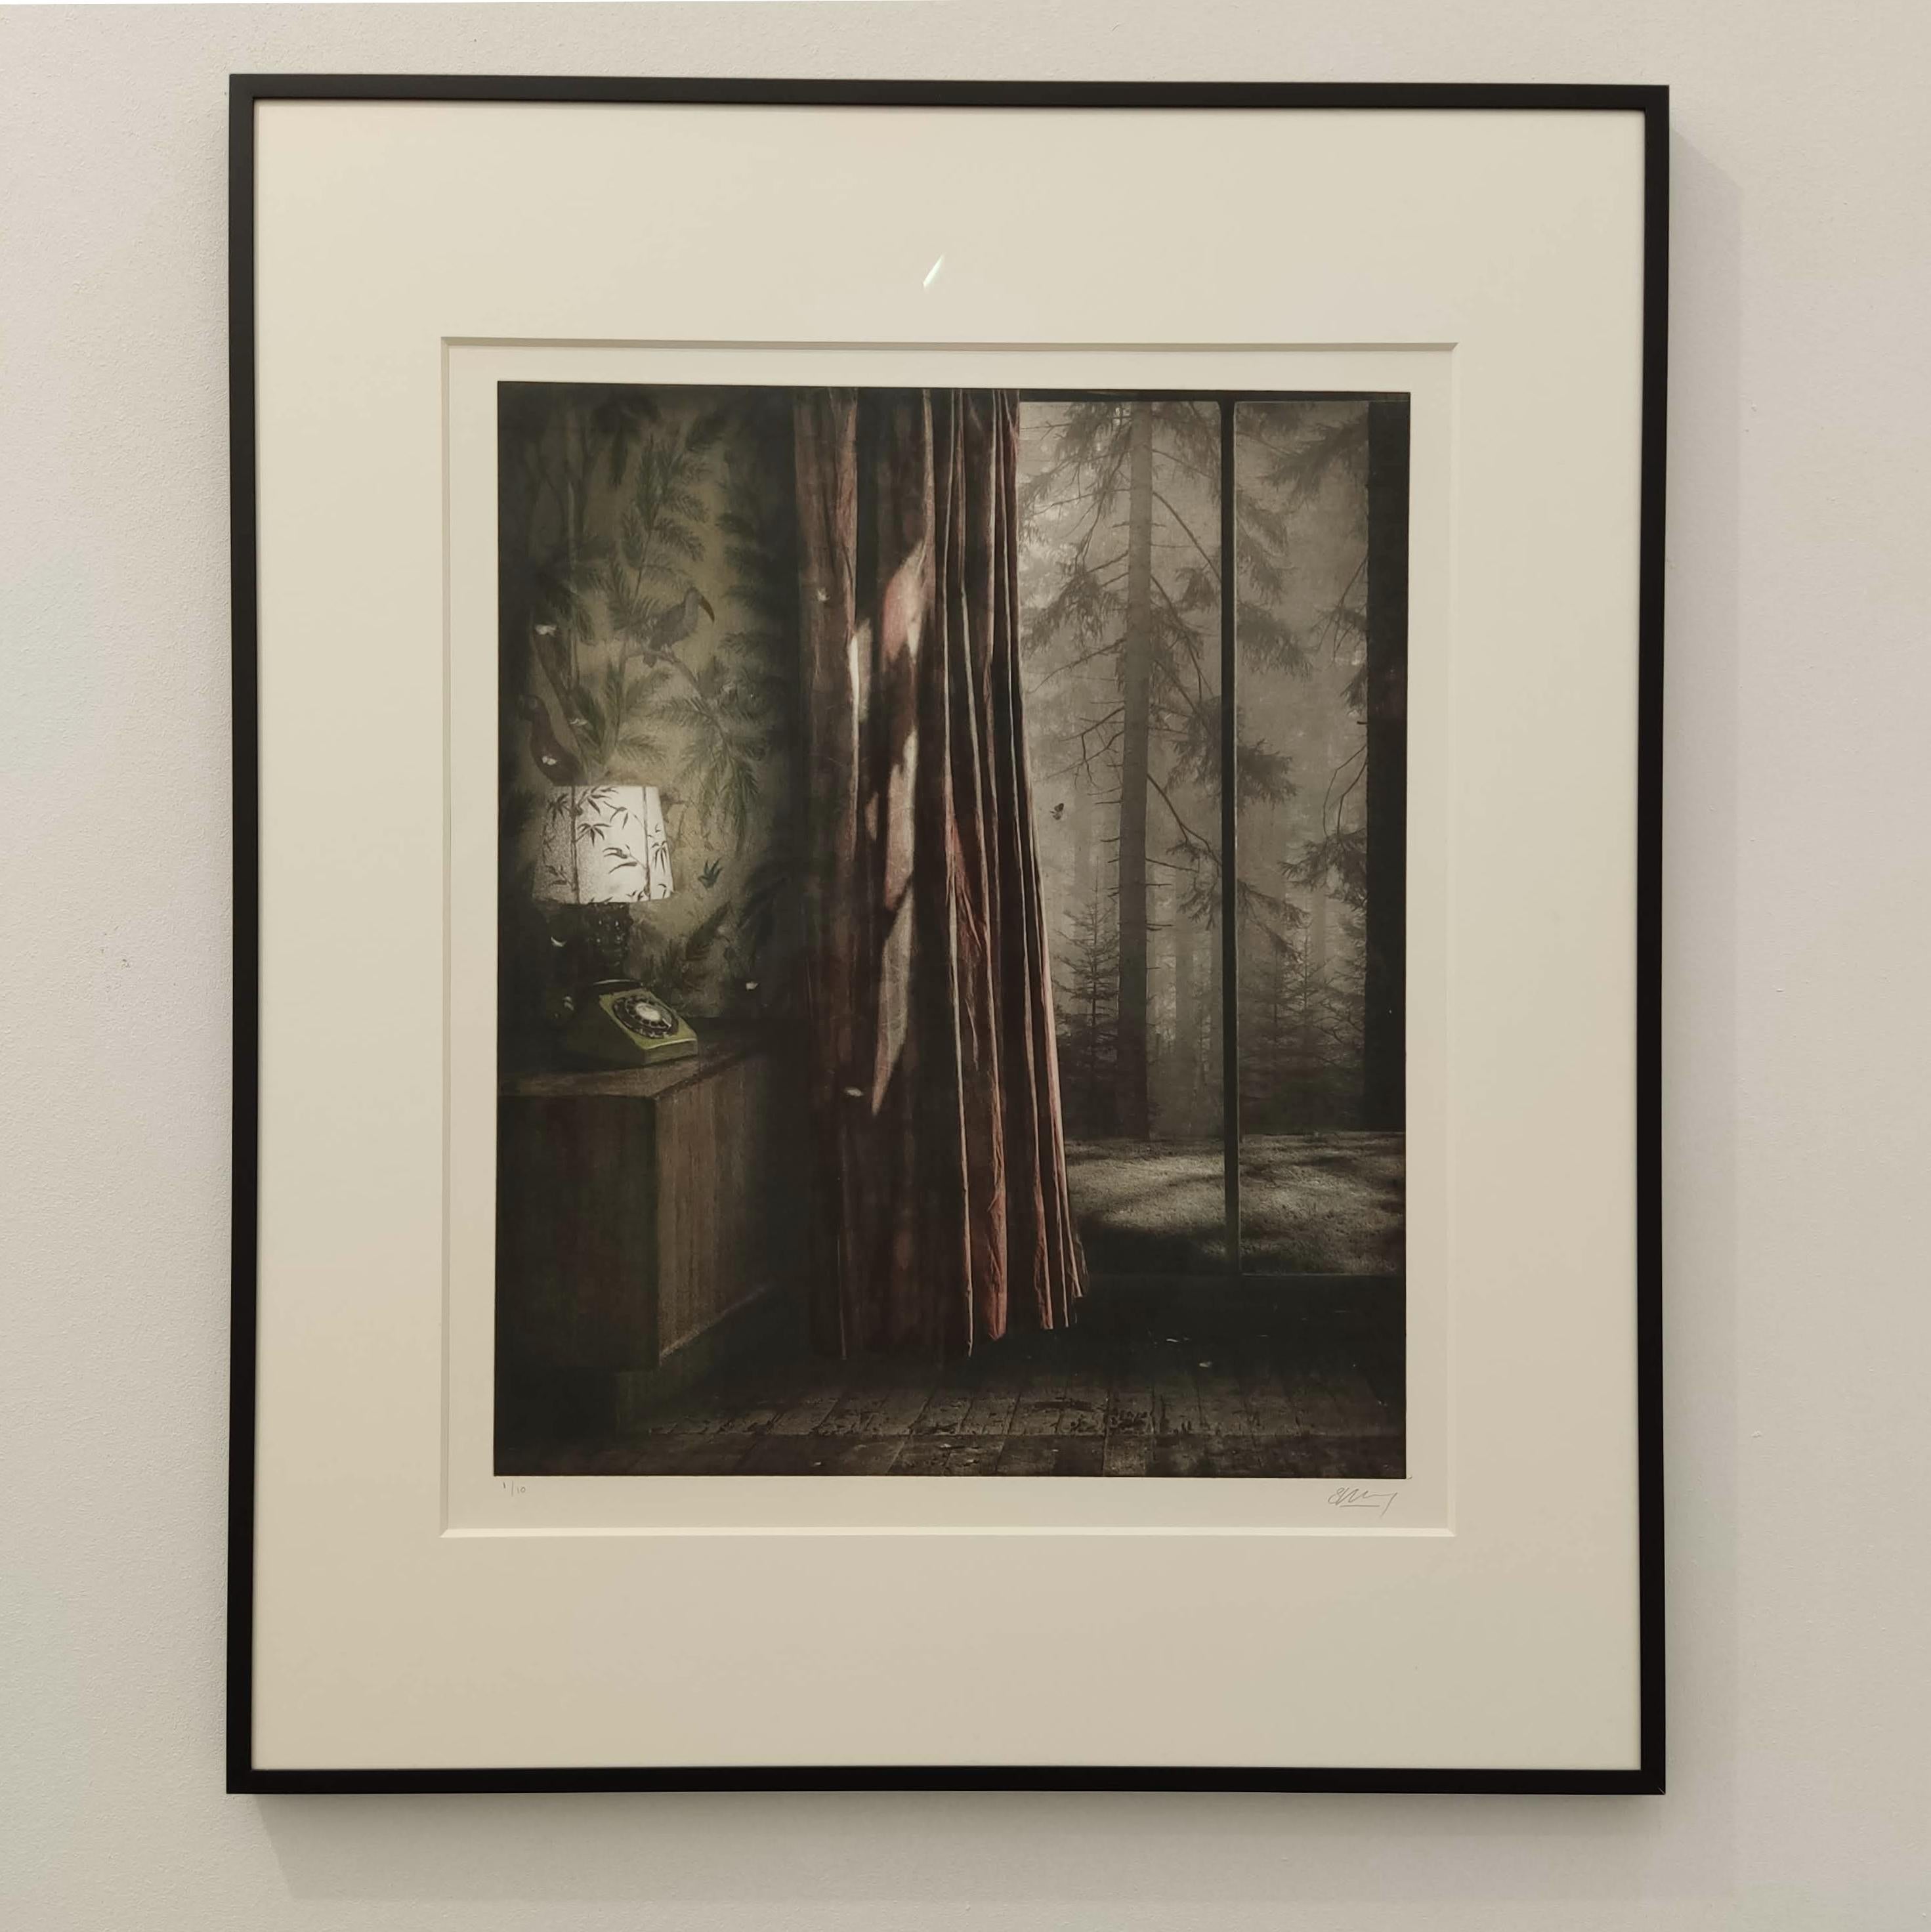 Interior with Telephone - Interior Photography, Photogravure, Film-making - Print by Suzanne Moxhay